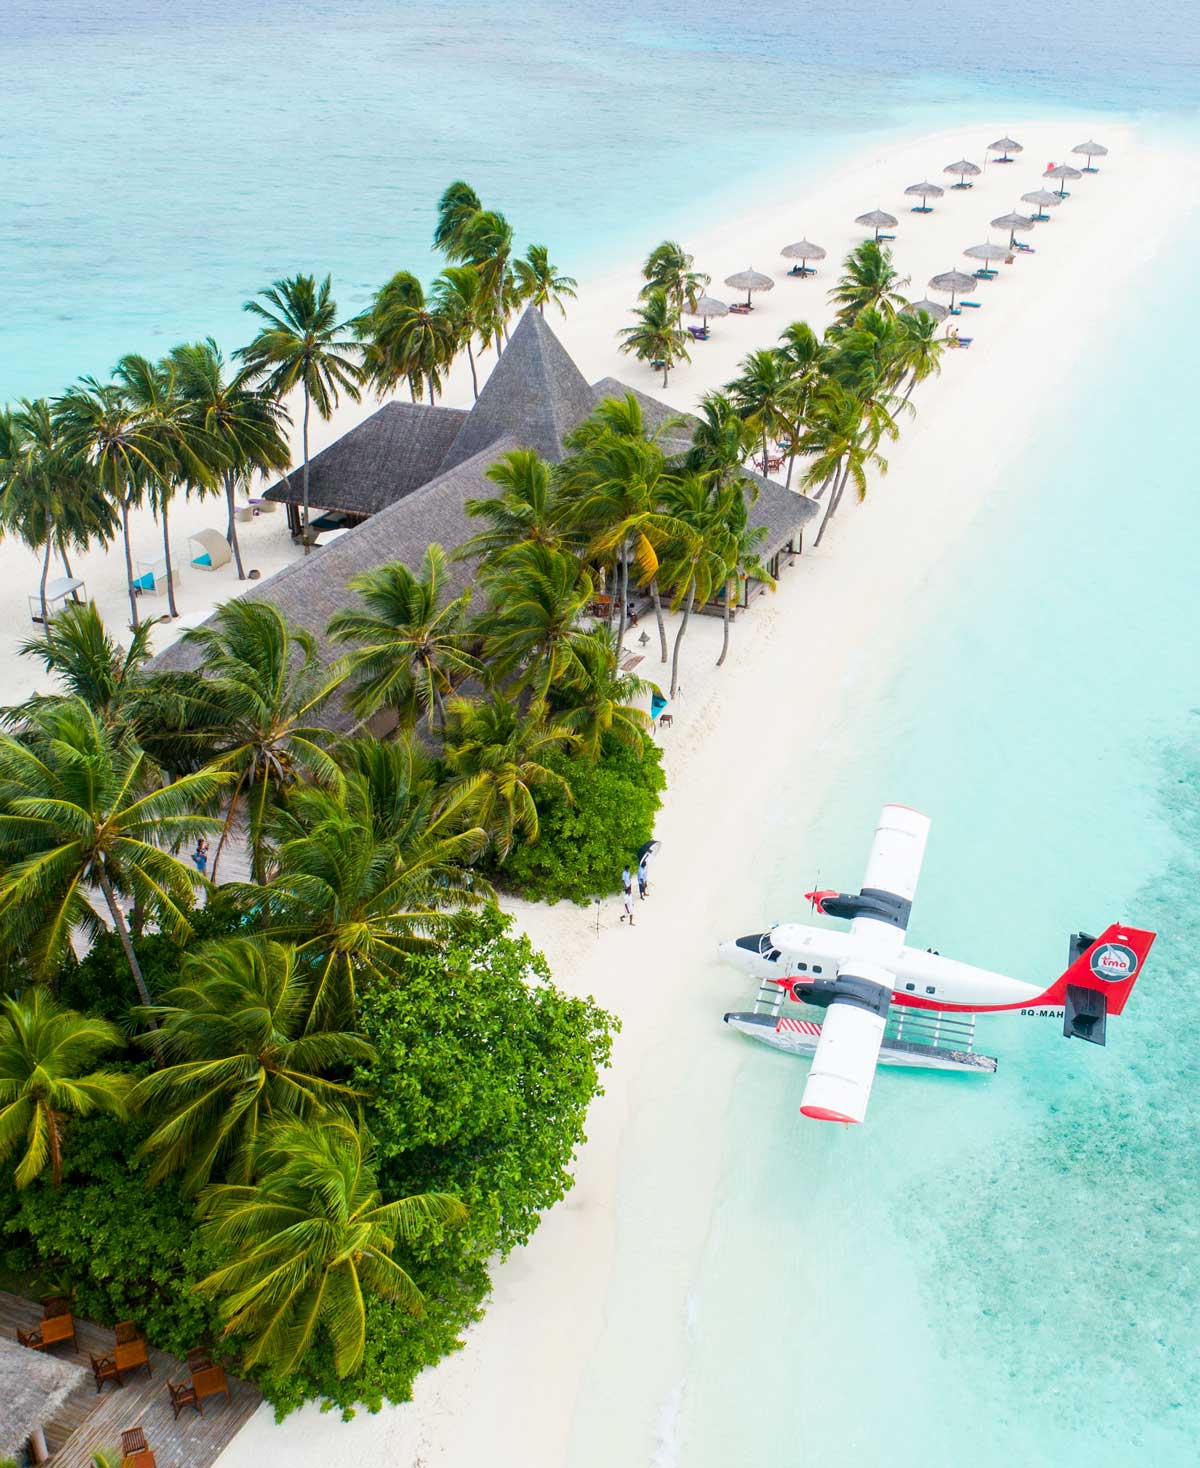 LUX* South Ari Atoll Maldives All-Inclusive Resorts You Must See to Believe